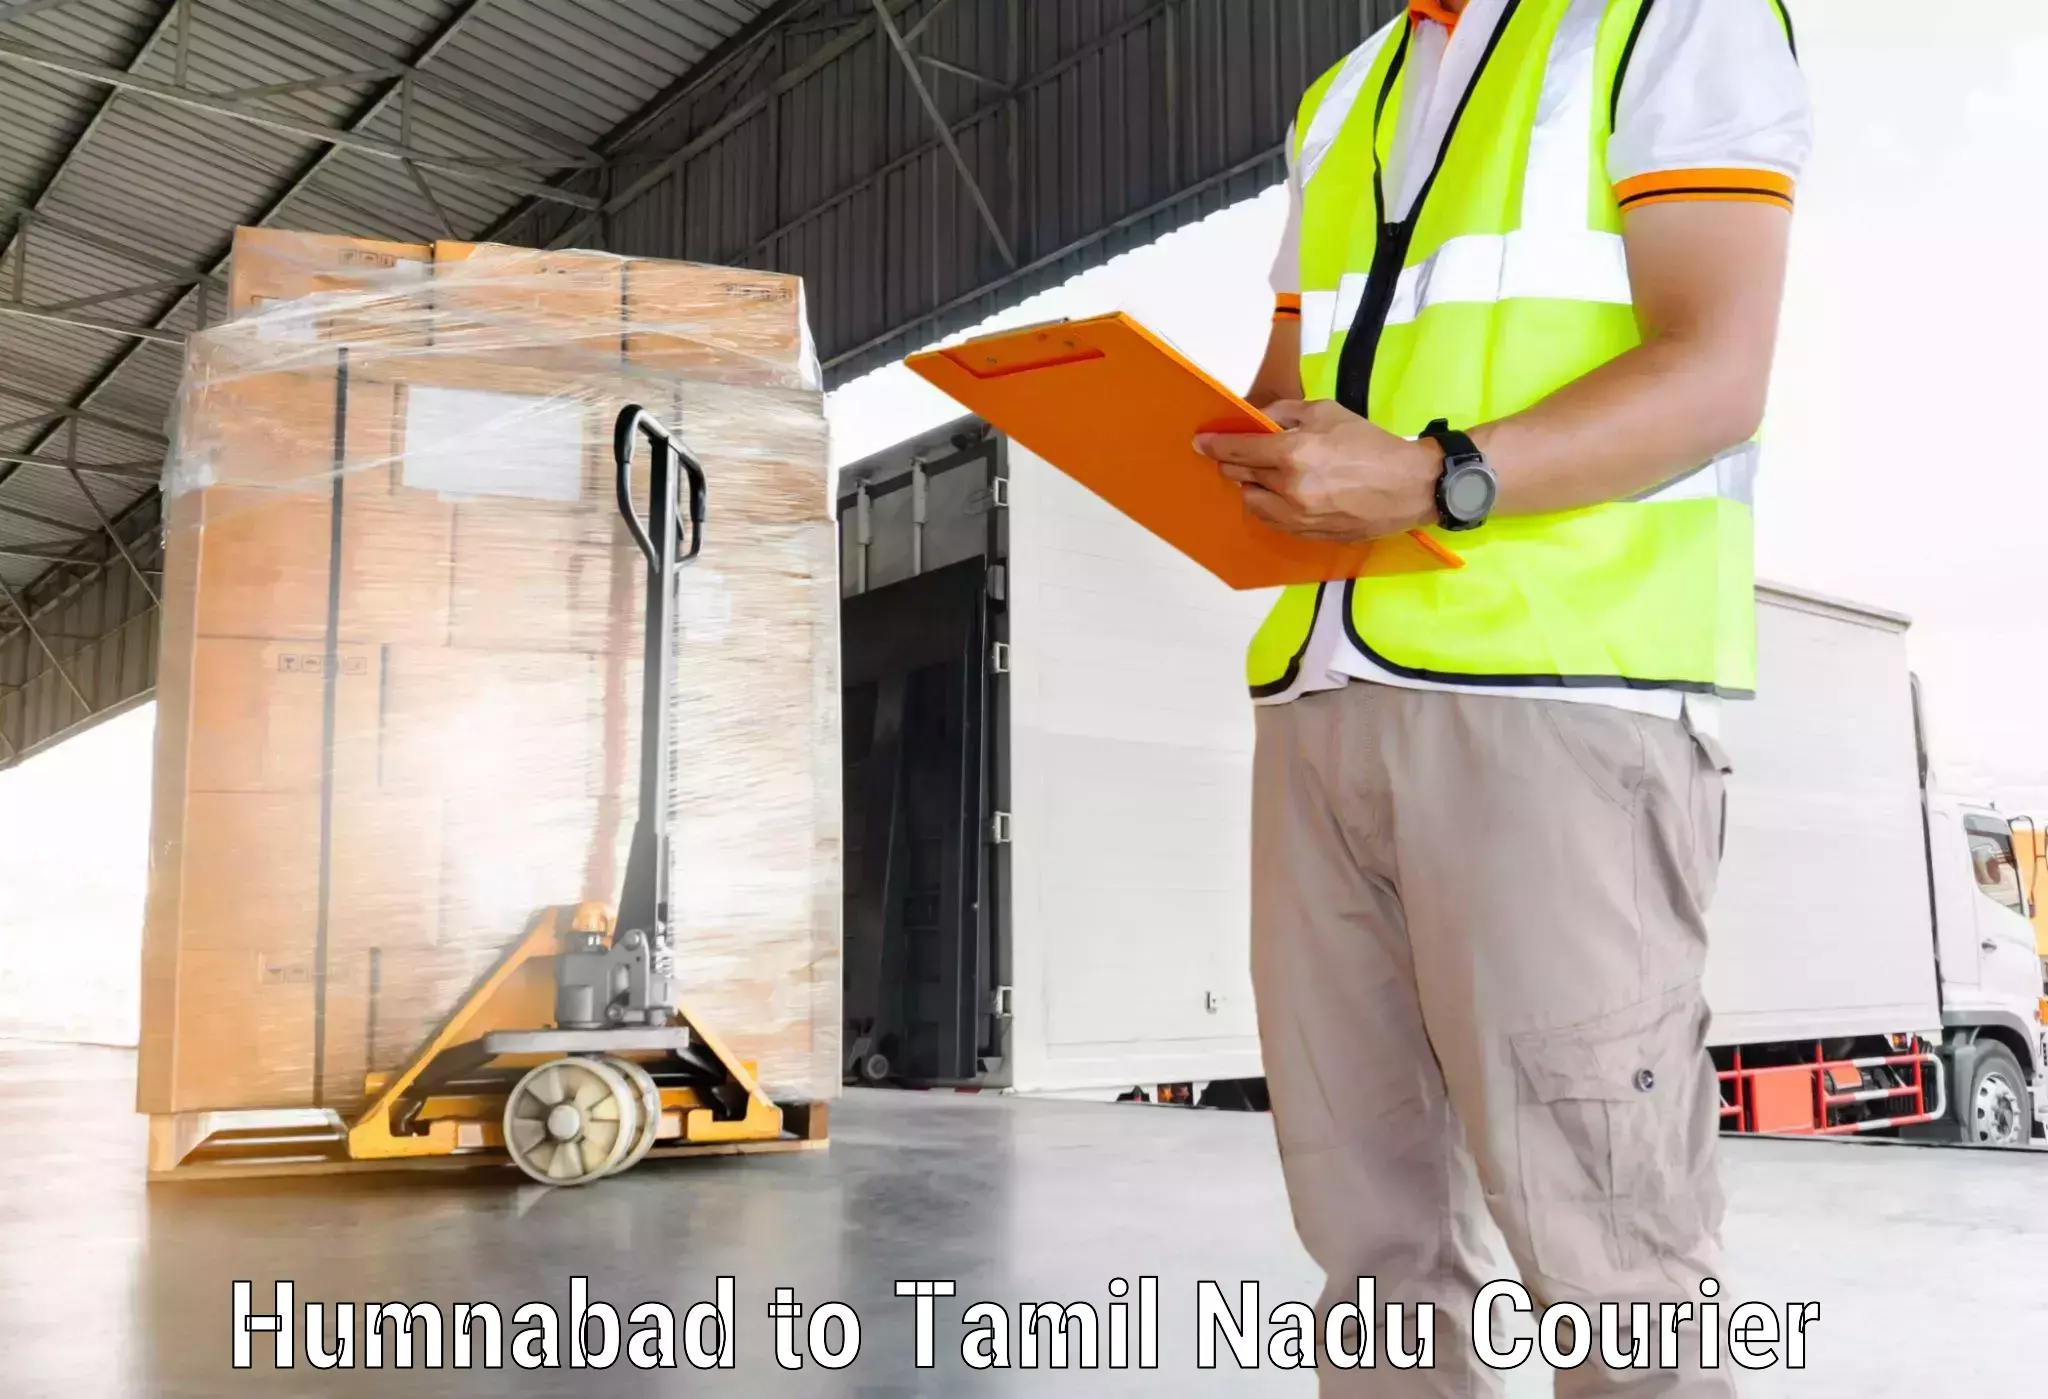 Reliable courier service in Humnabad to Mylapore